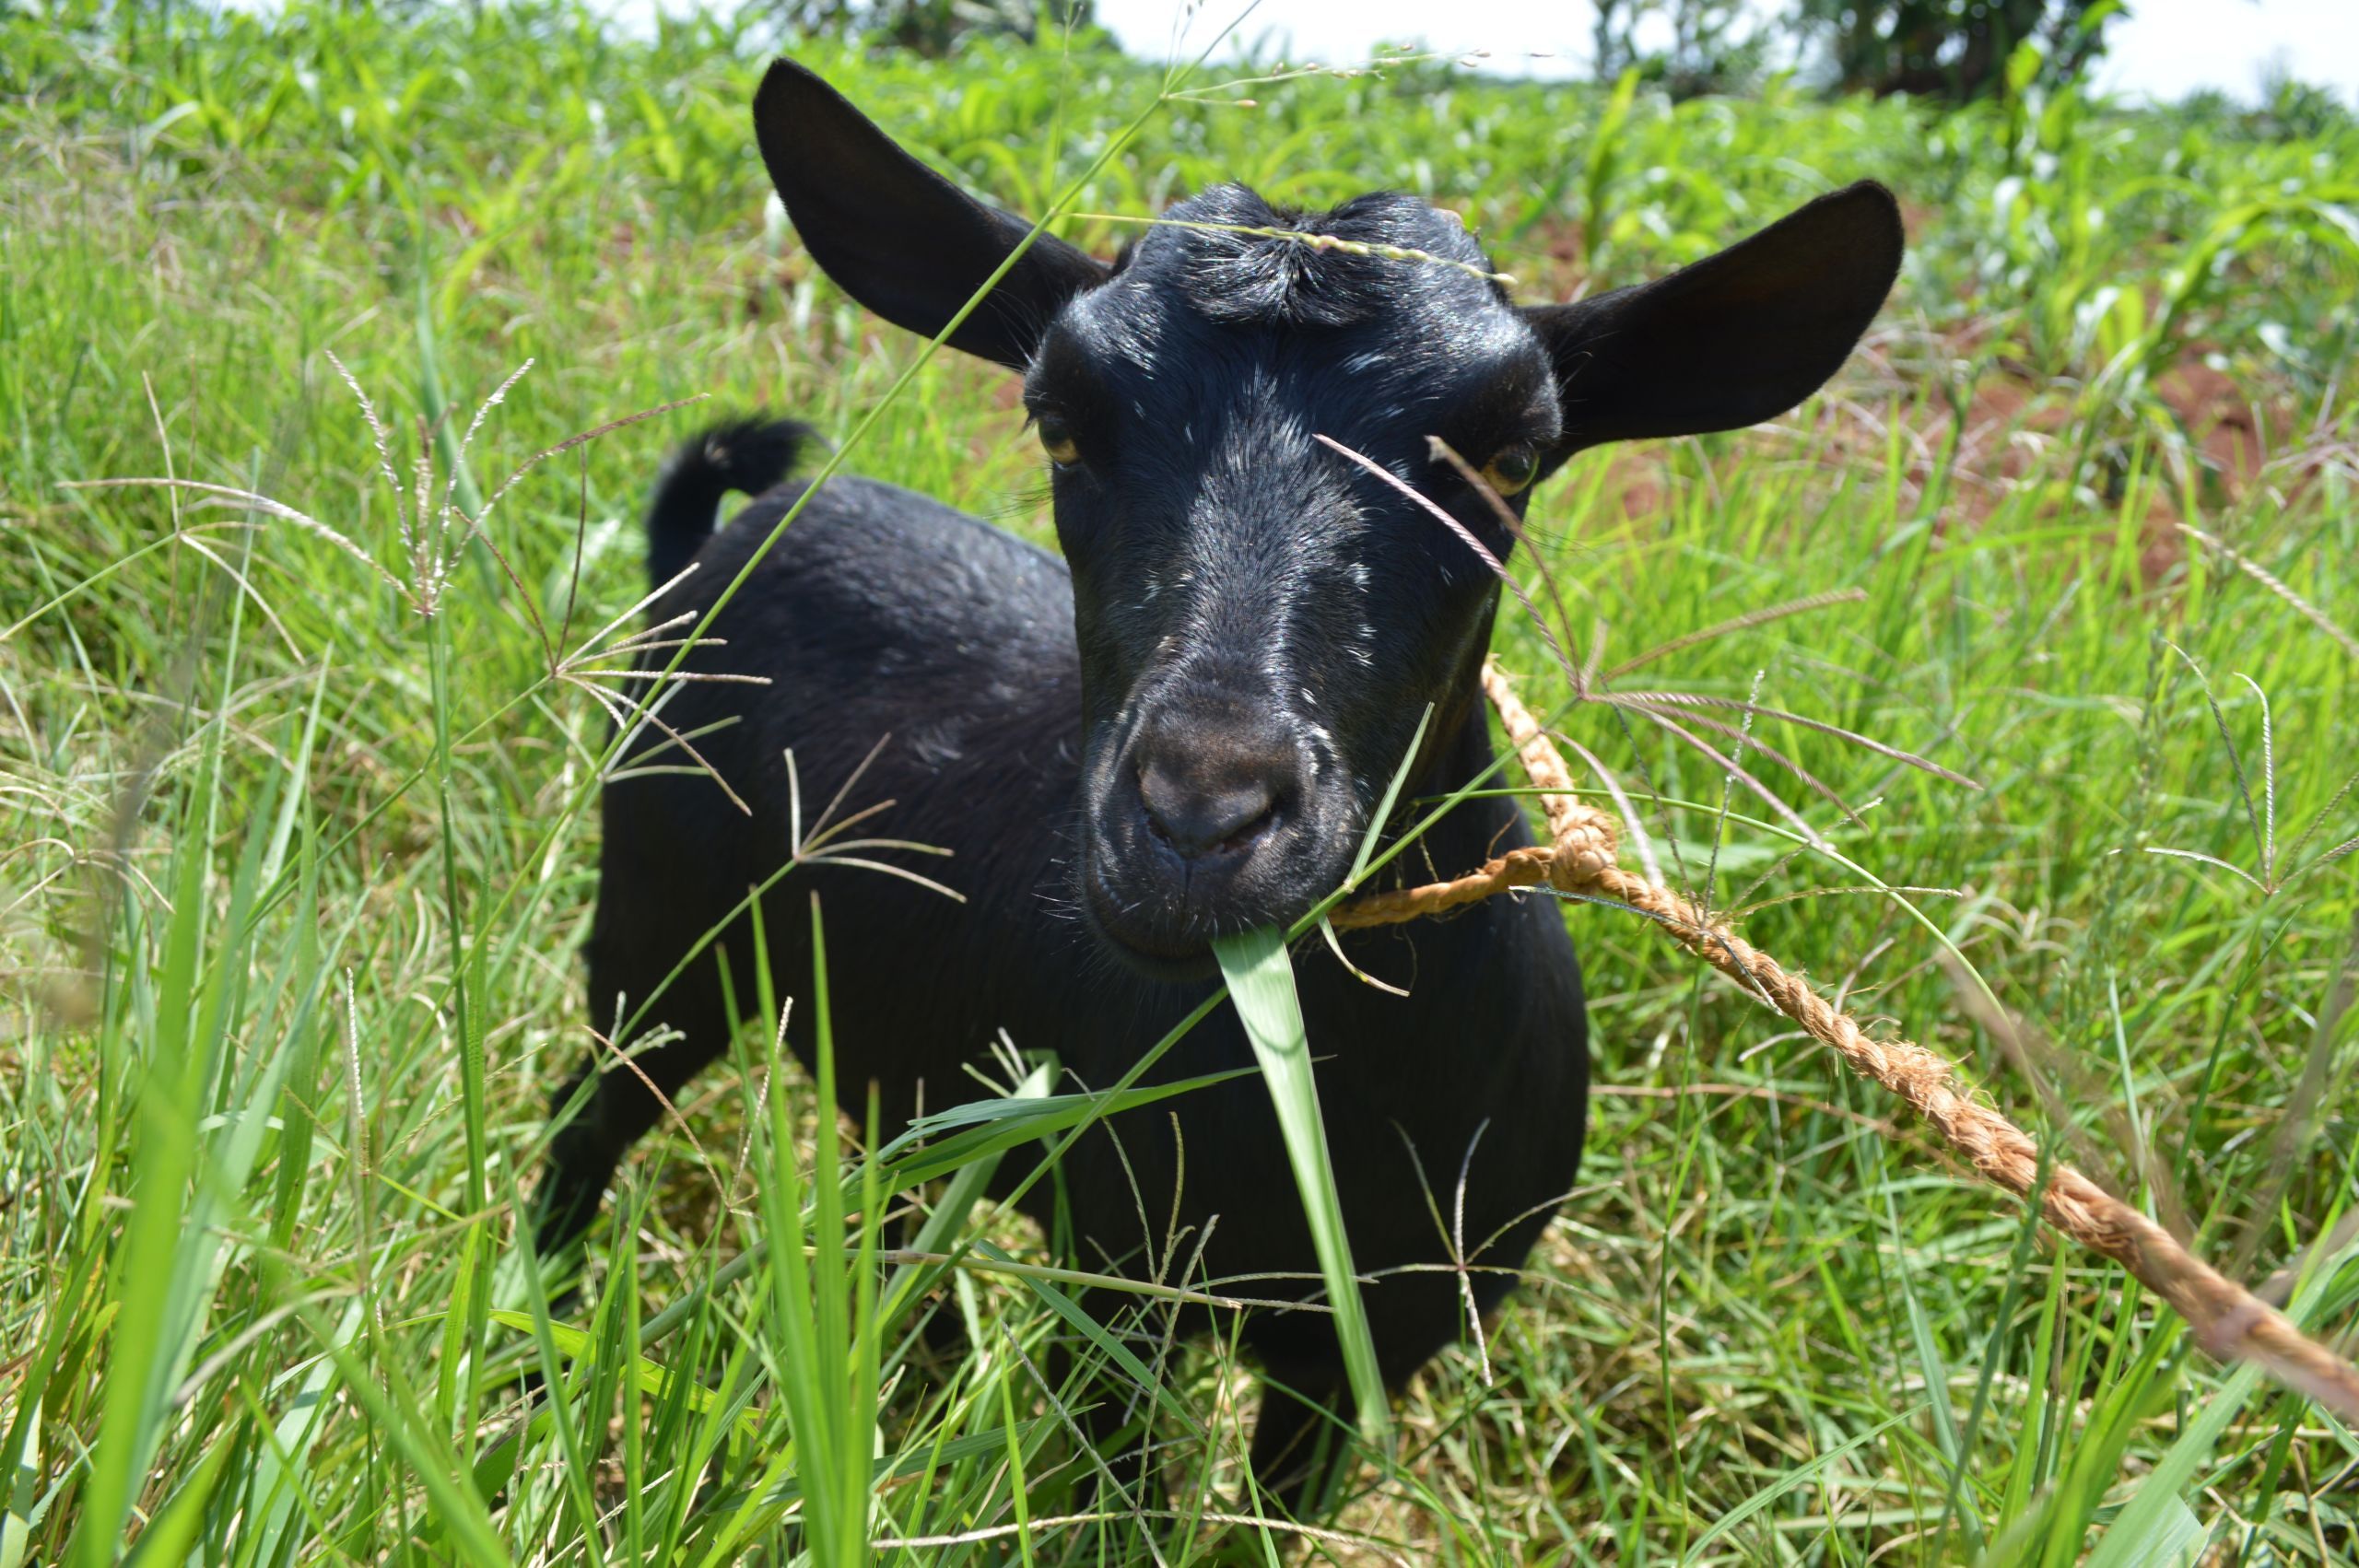 Okomo John's goat. Forest residents are not allowed to graze their animals in the forest, but many do and are forced to pay a fine. Image by Annika McGinnis. Uganda, 2019. 